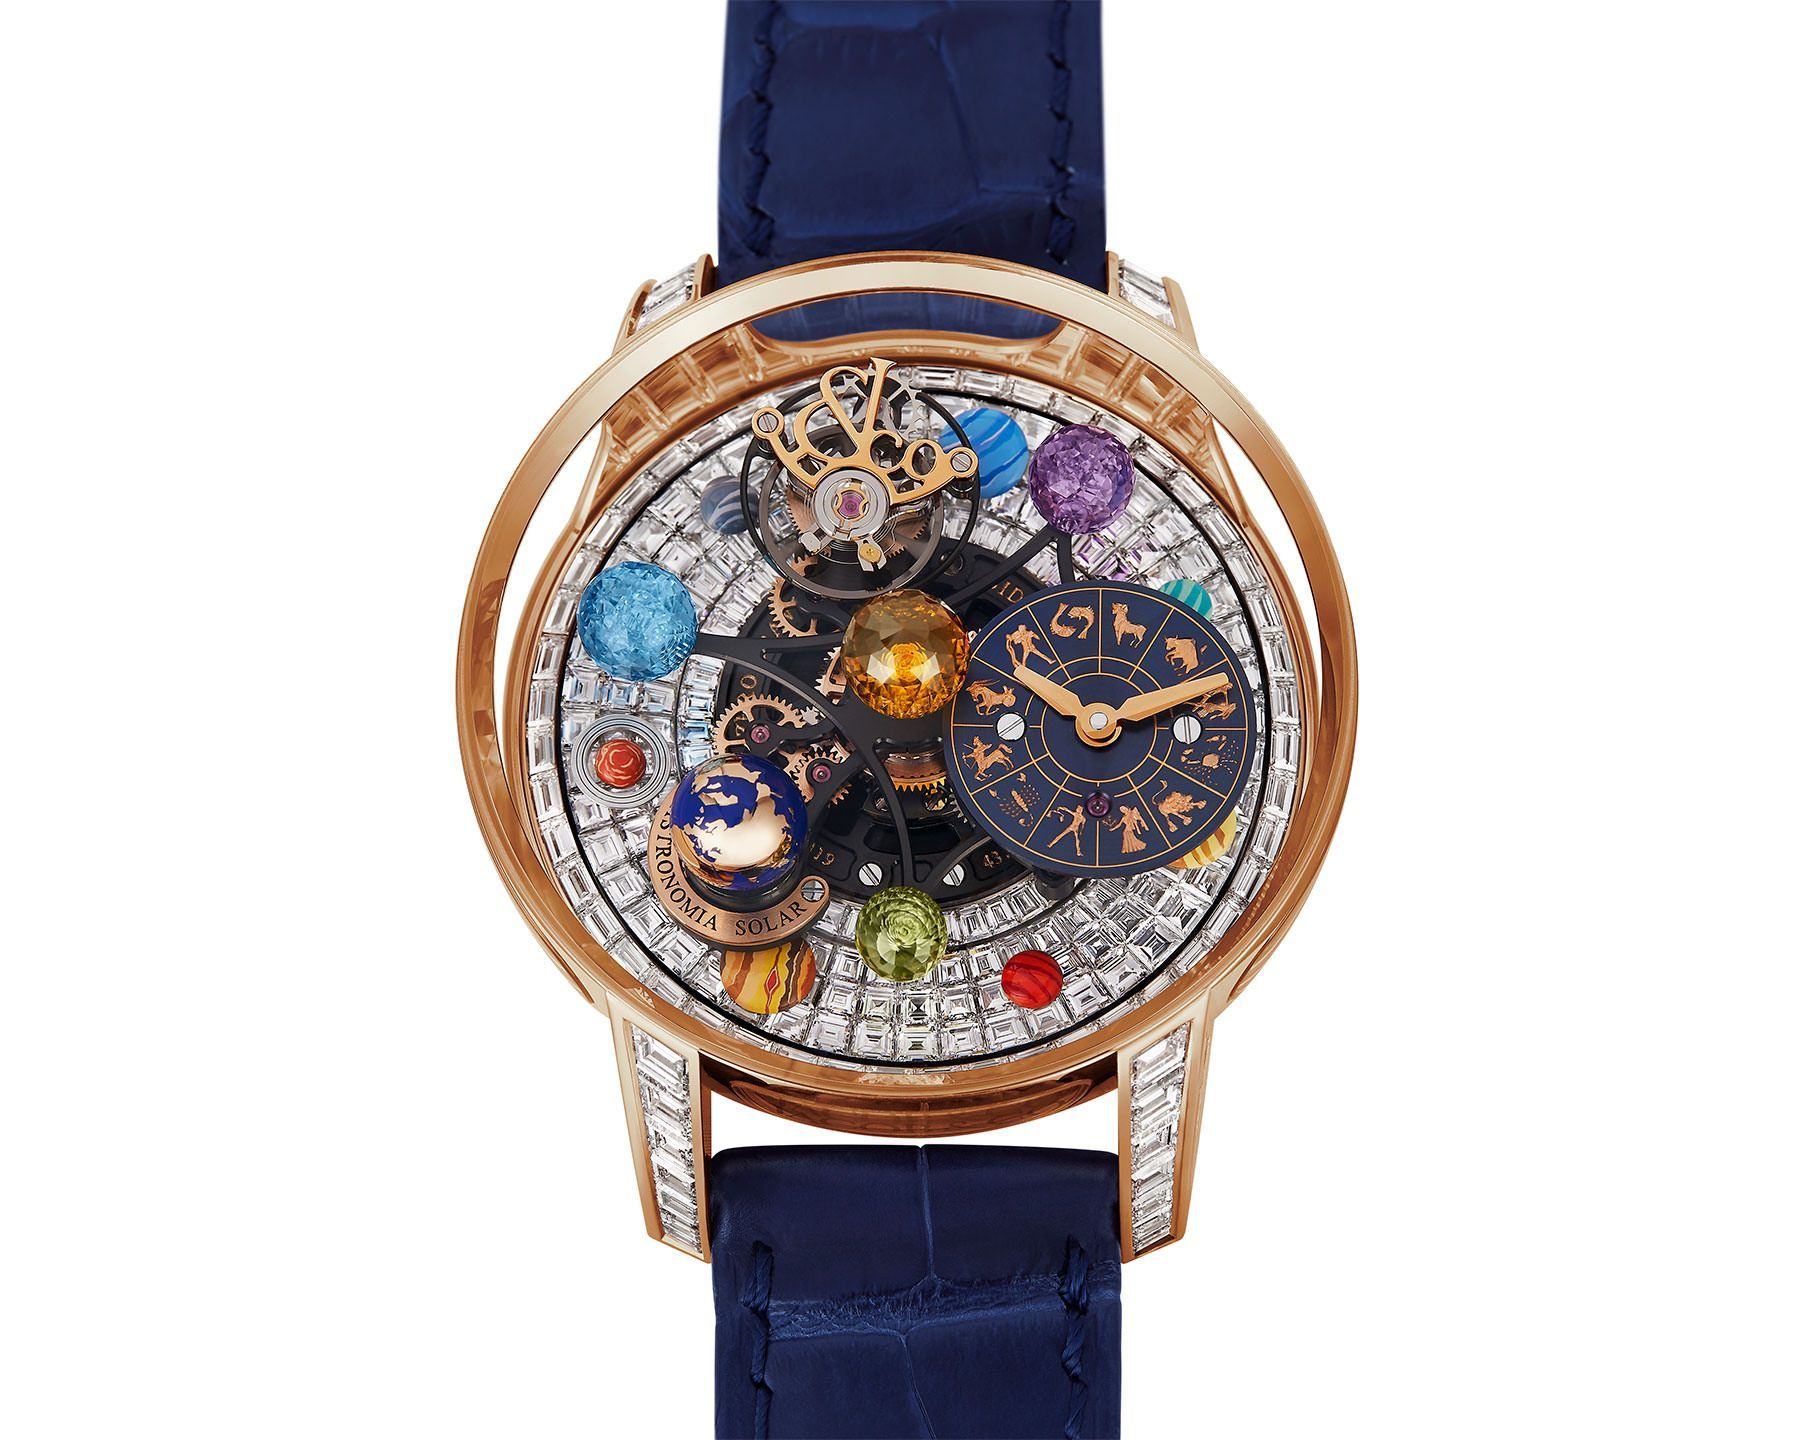 Jacob & Co. Astronomia Astronomia Solar Blue Dial 43 mm Manual Winding Watch For Men - 2